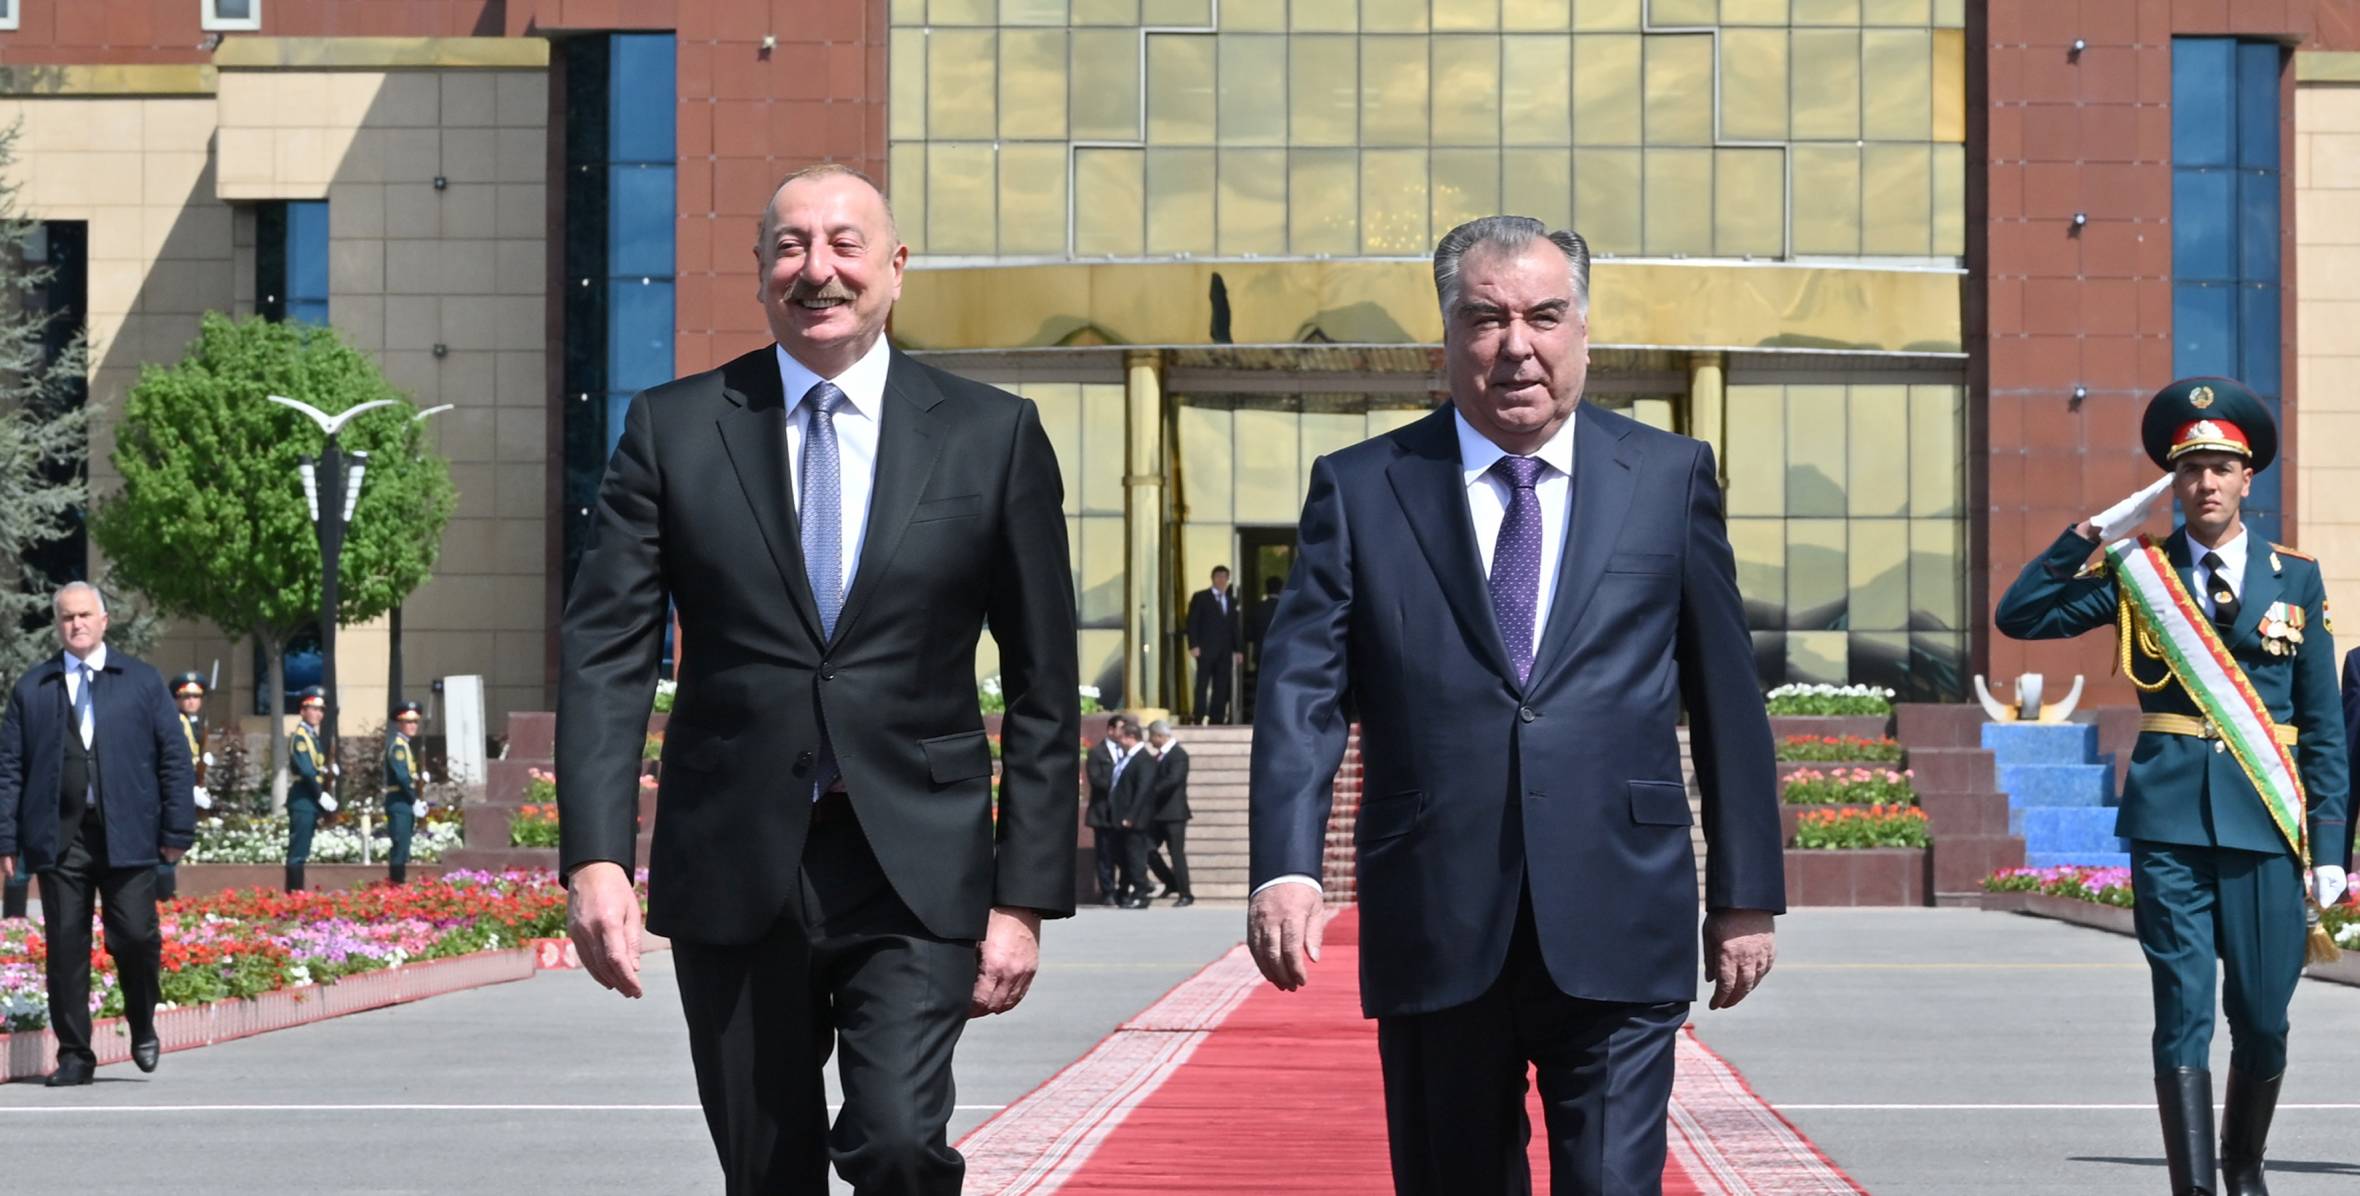 Ilham Aliyev completed his state visit to Tajikistan